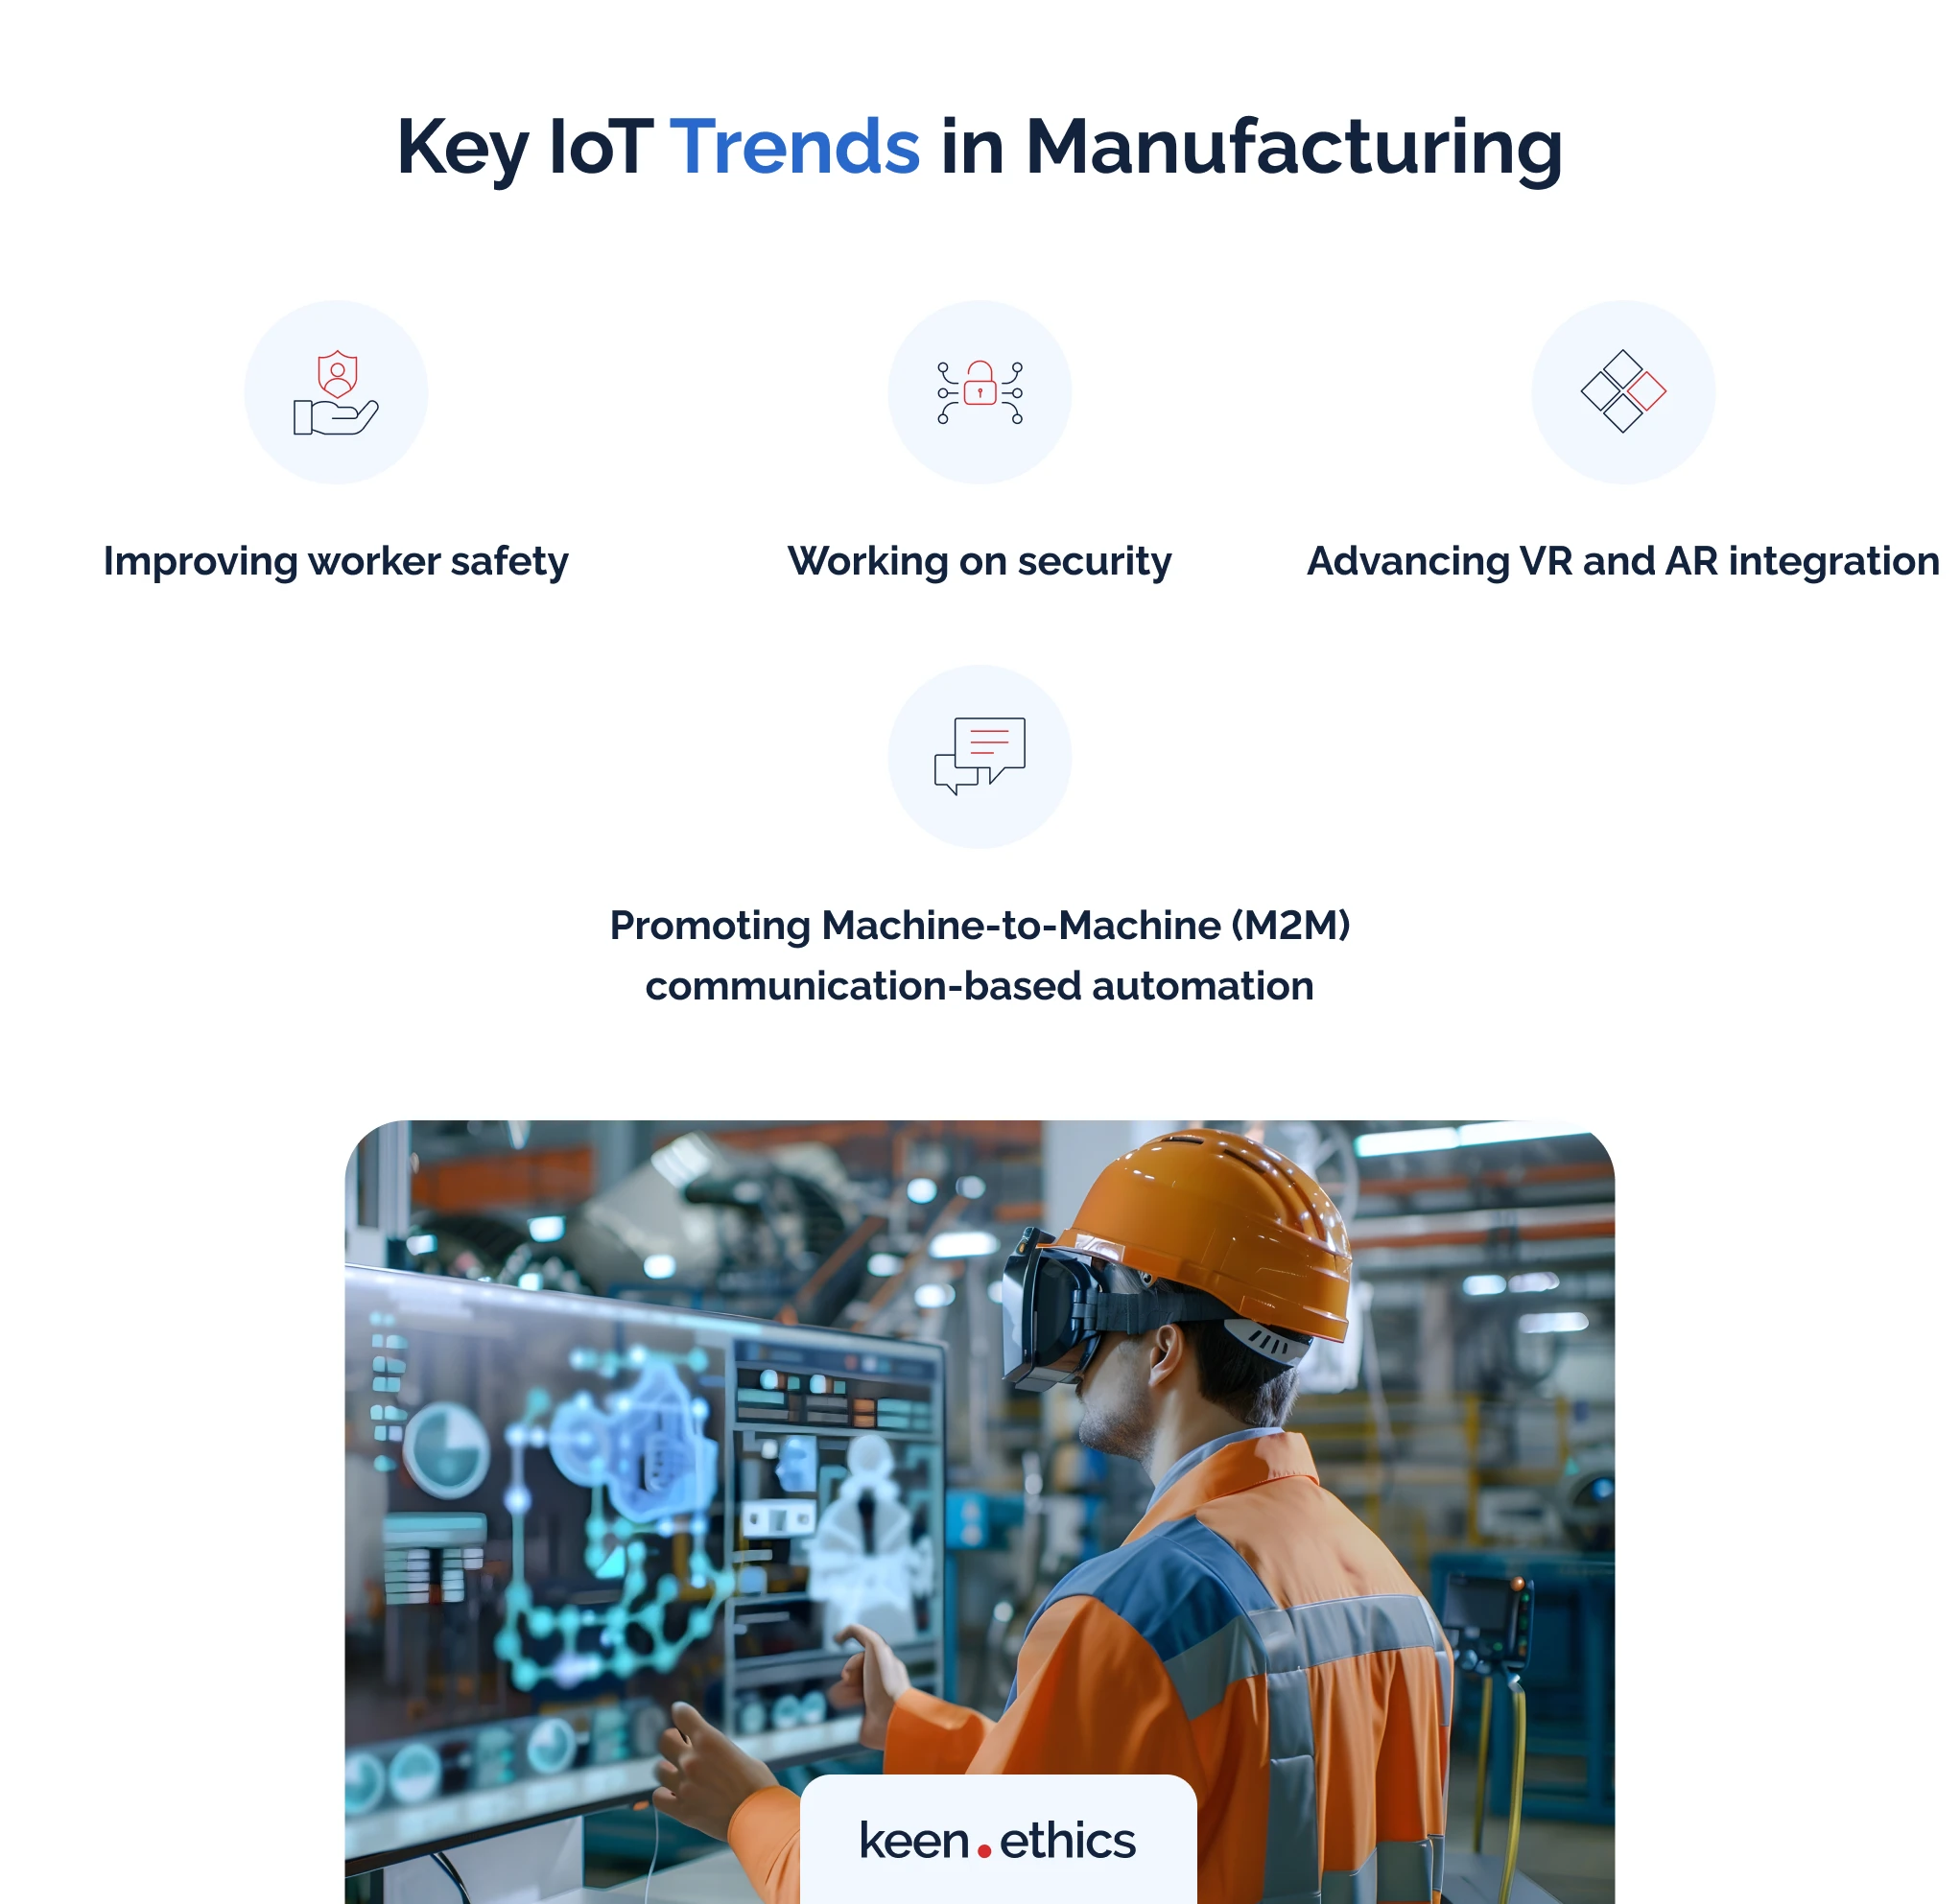 Key IoT trends in manufacturing